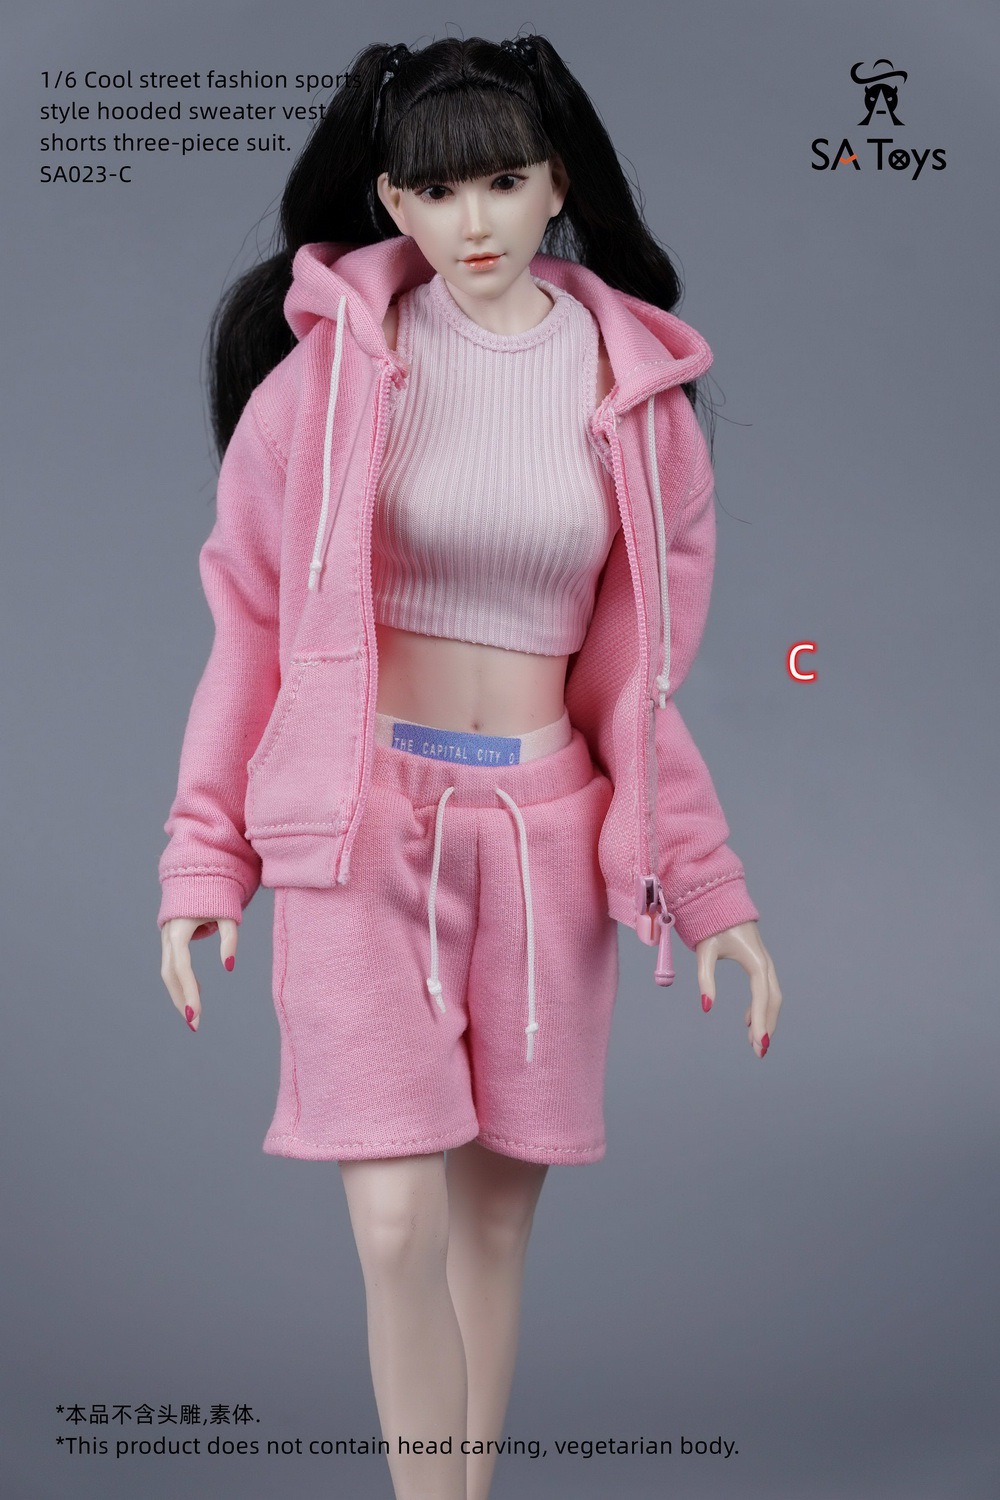 SAToys - NEW PRODUCT: SA Toys: 1/6 hip skirt / floral elastic skirt / fashionable sports style hooded sweater cover, hip-hop fisherman hat halter and footwear casual pants [variety optional] 17021510